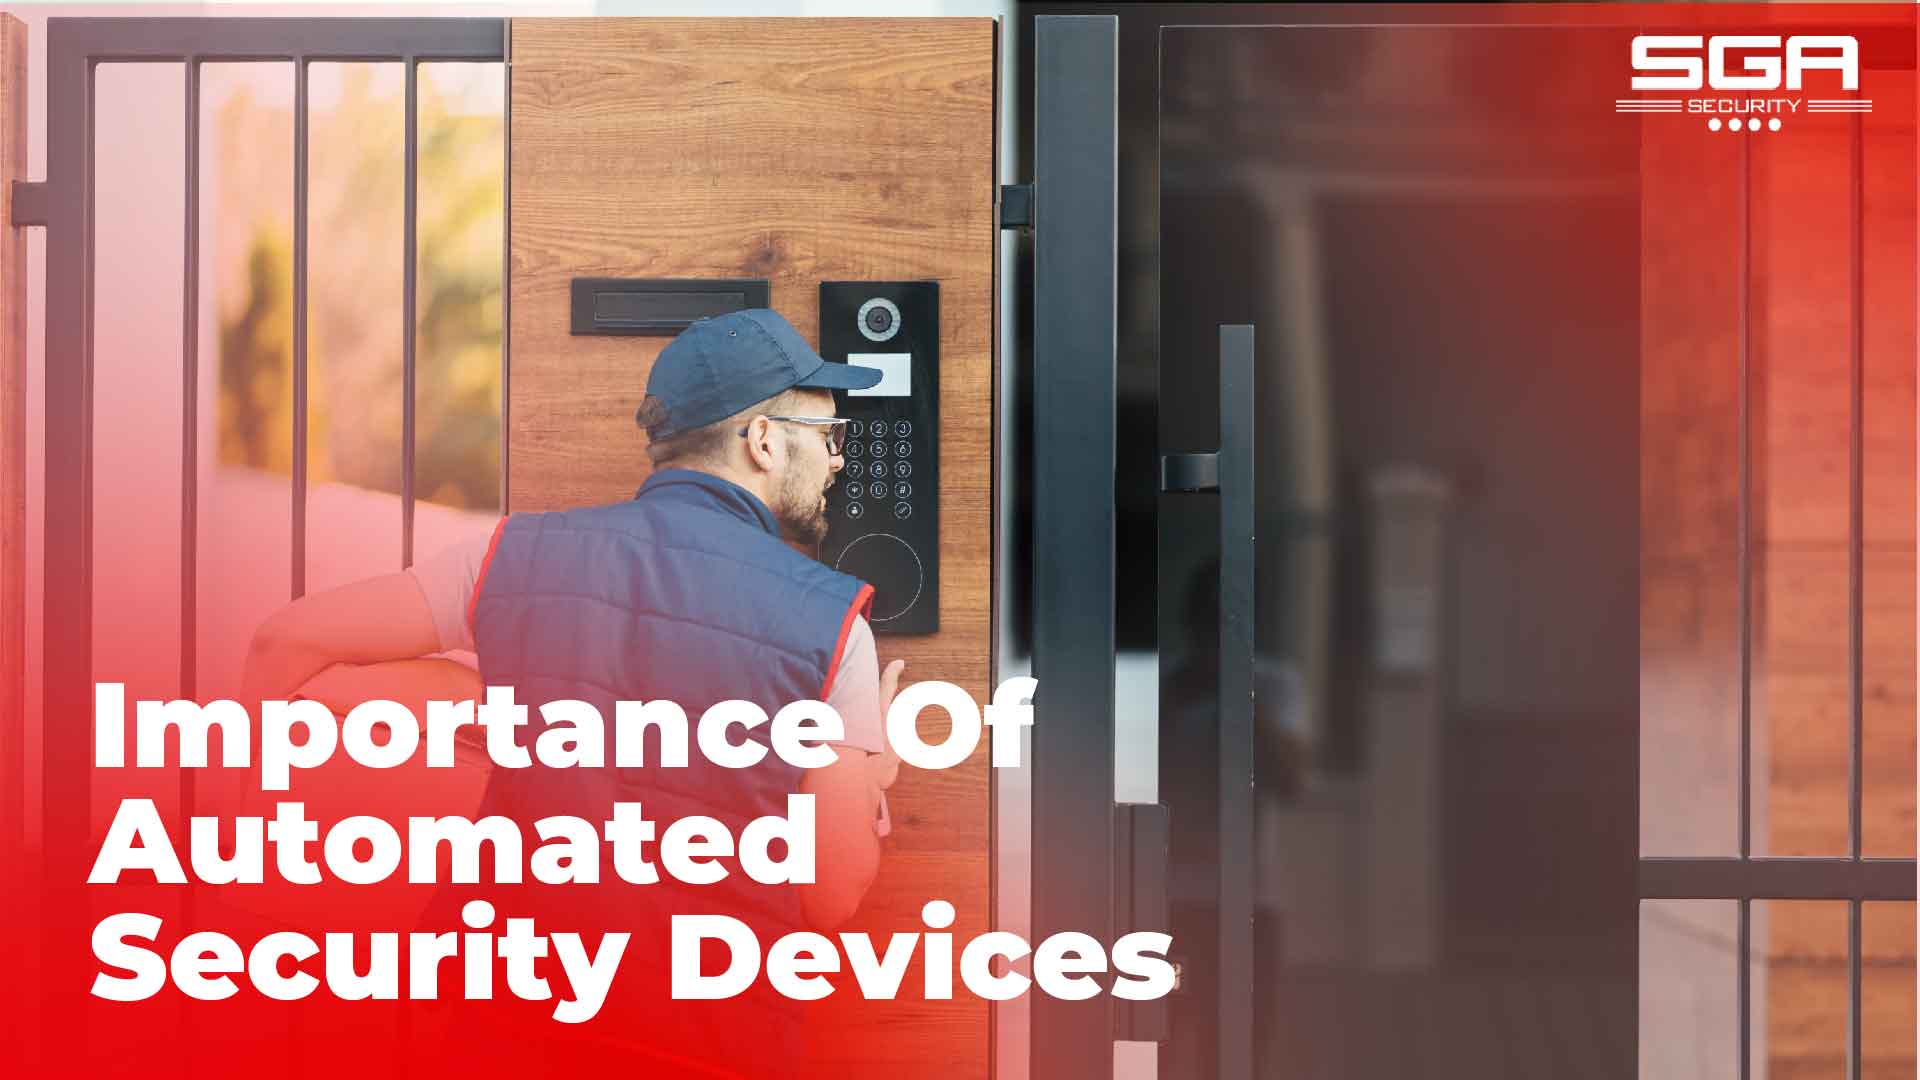 A man setting up security system